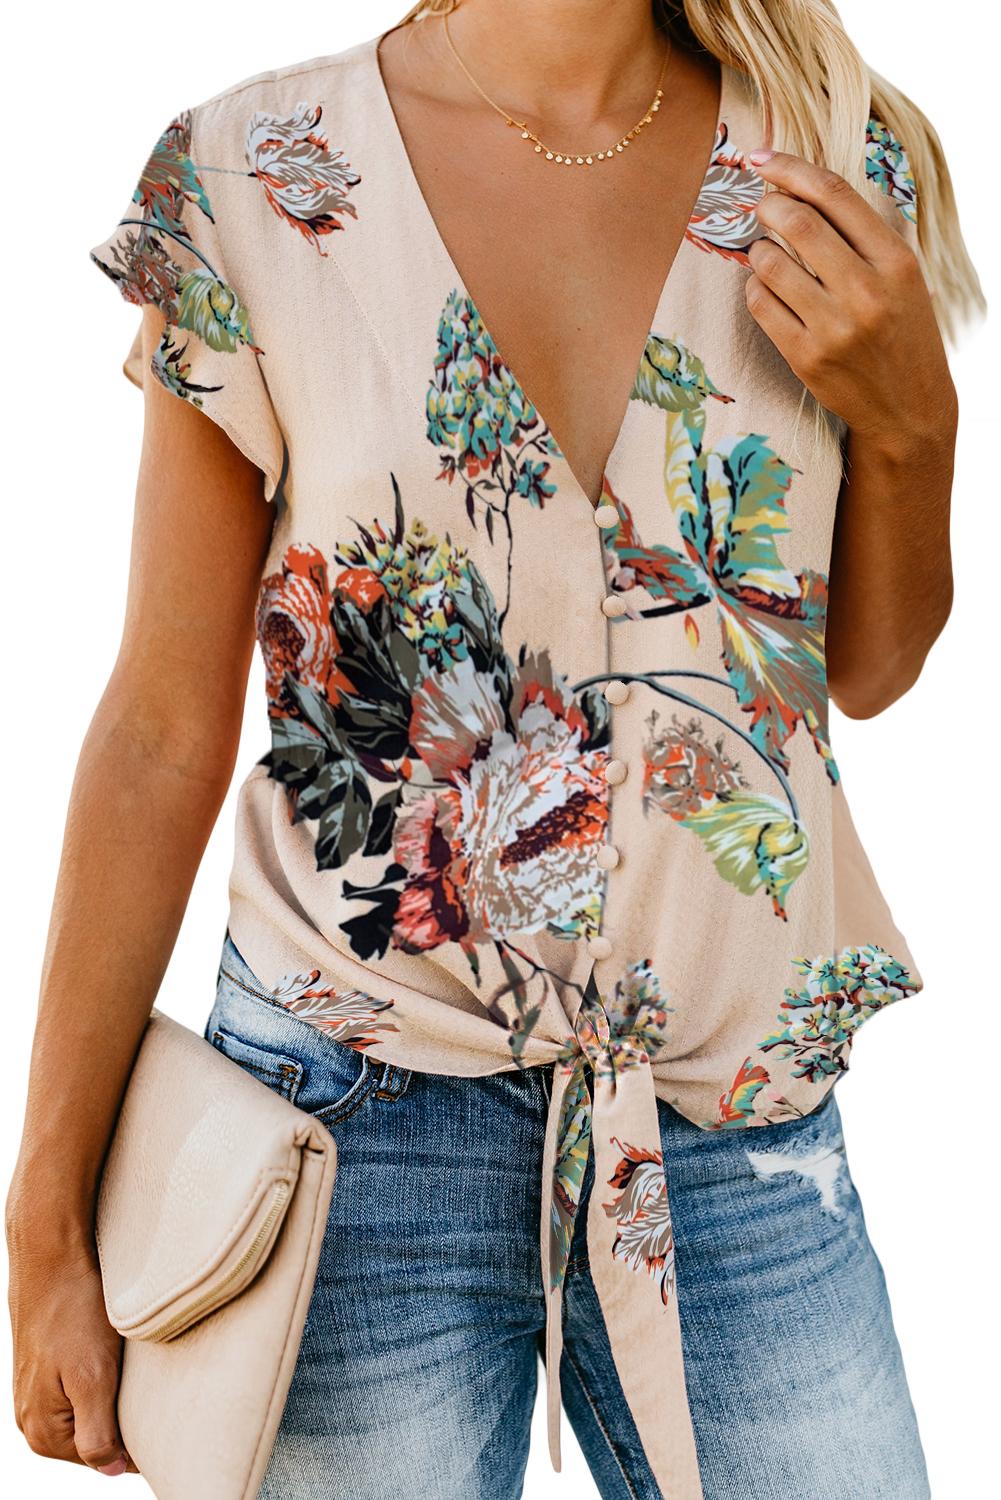 $ 19.99 - Asvivid Womens Floral Printed Button Down V-Neck Tops Ruffle